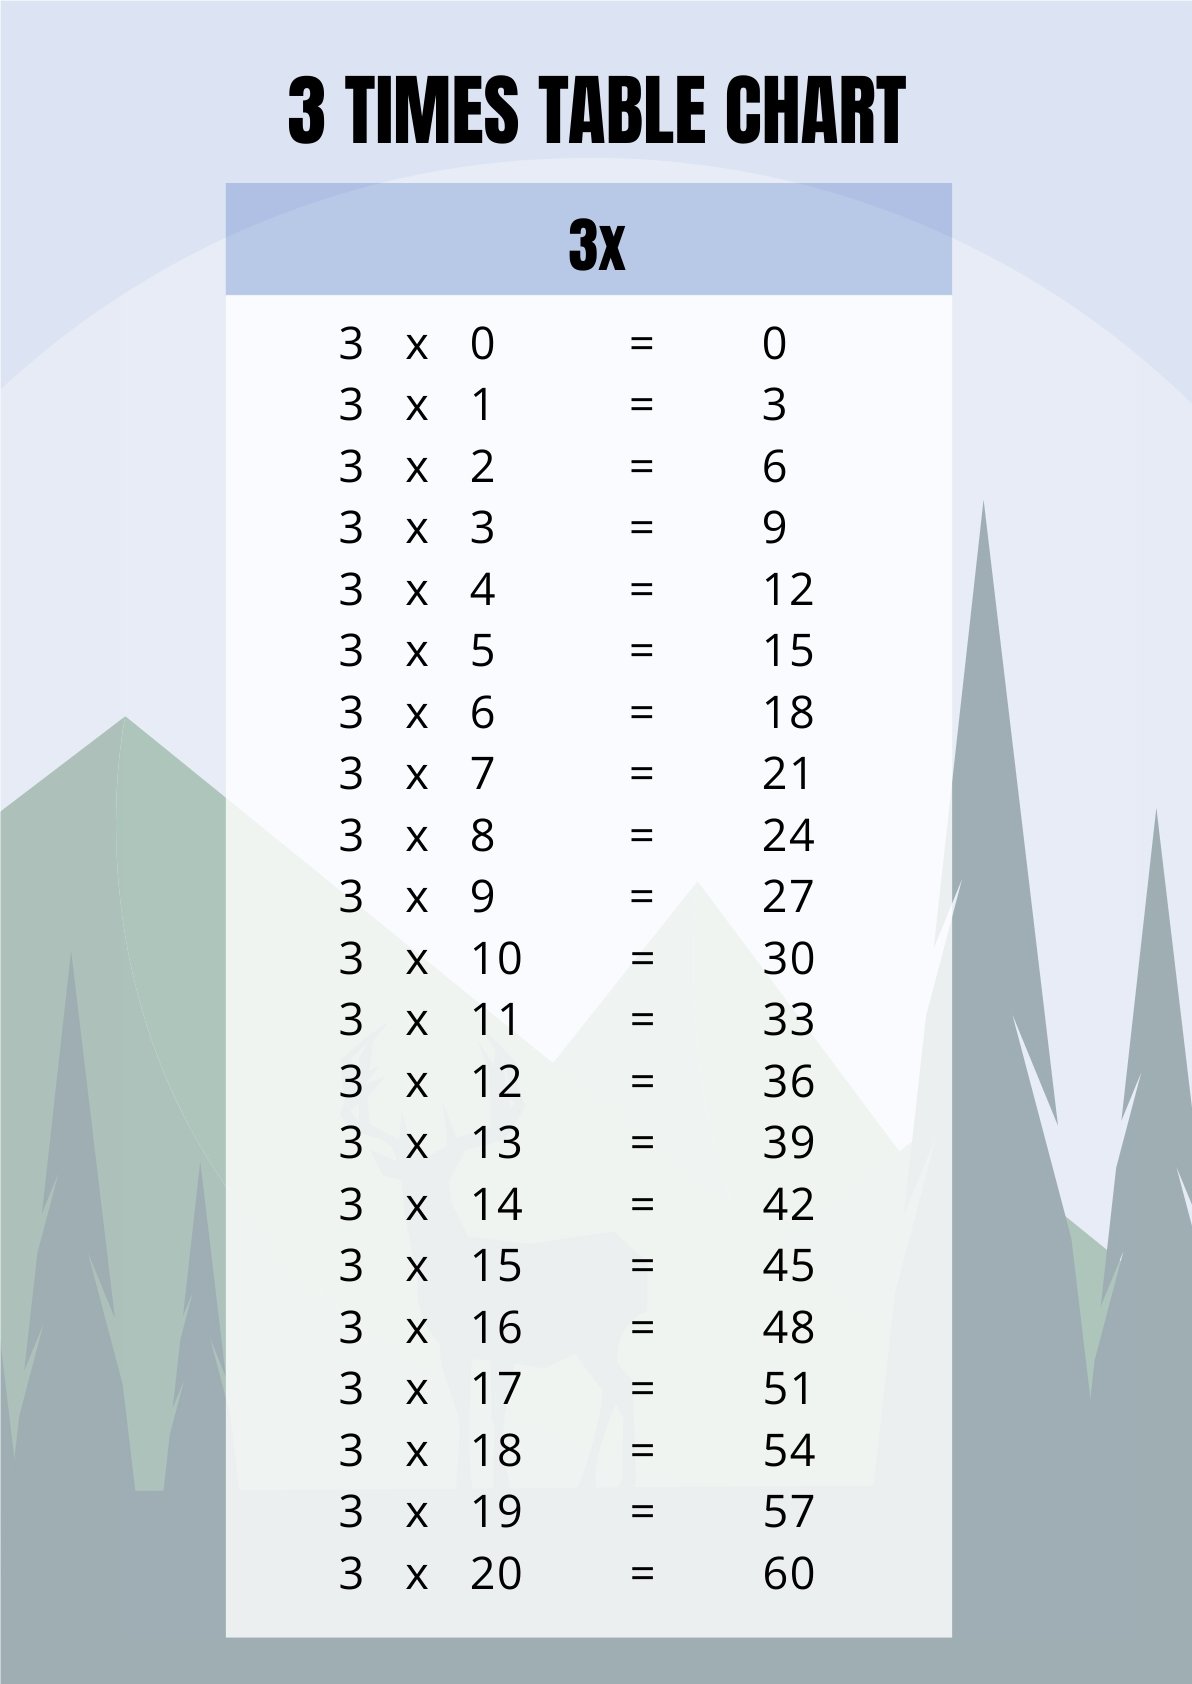 3 Times Table Chart in PDF